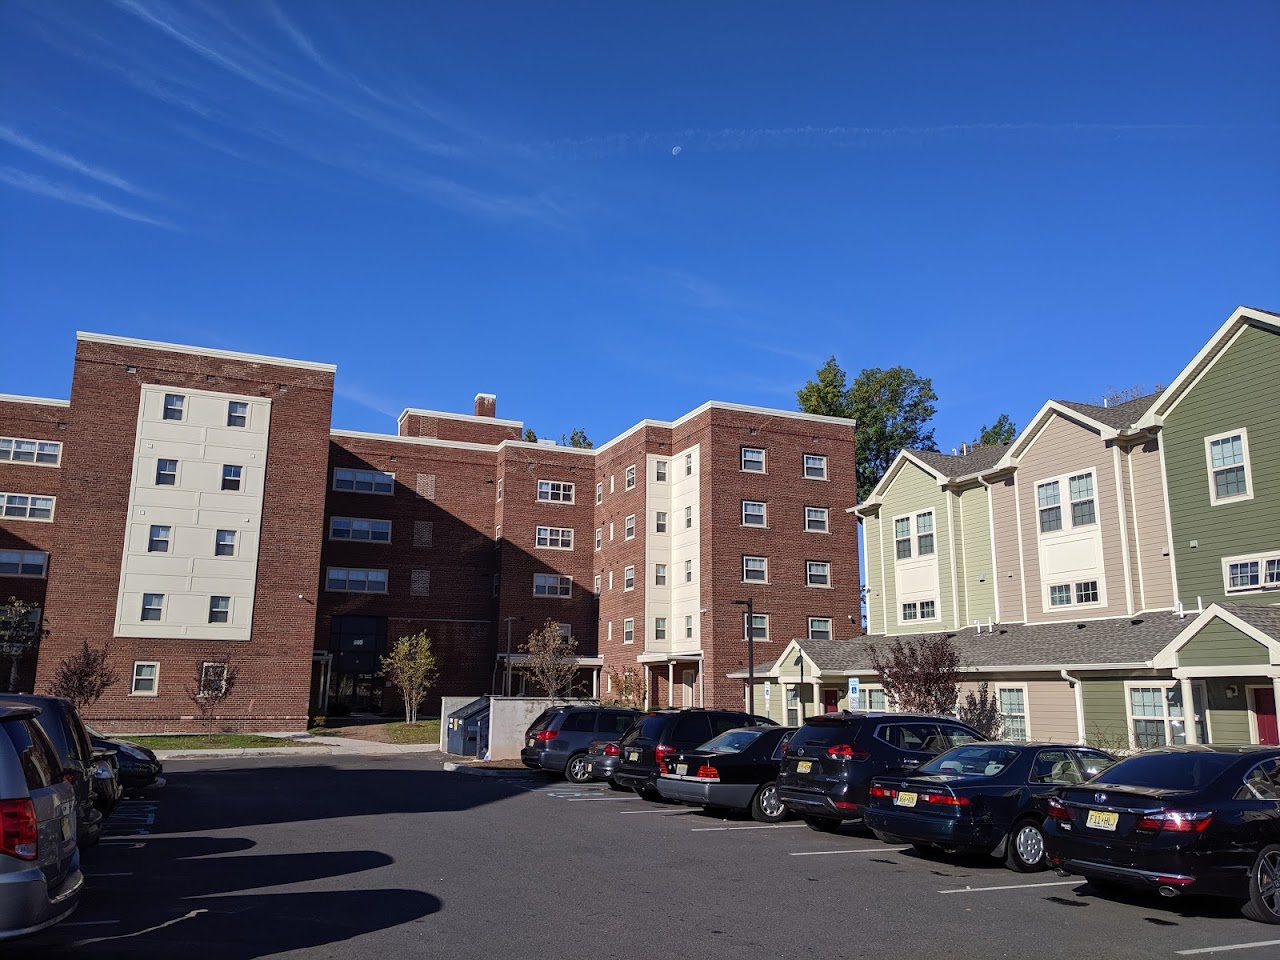 Photo of WESTMINSTER HEIGHTS. Affordable housing located at 380 IRVINGTON AVENUE ELIZABETH, NJ 07208